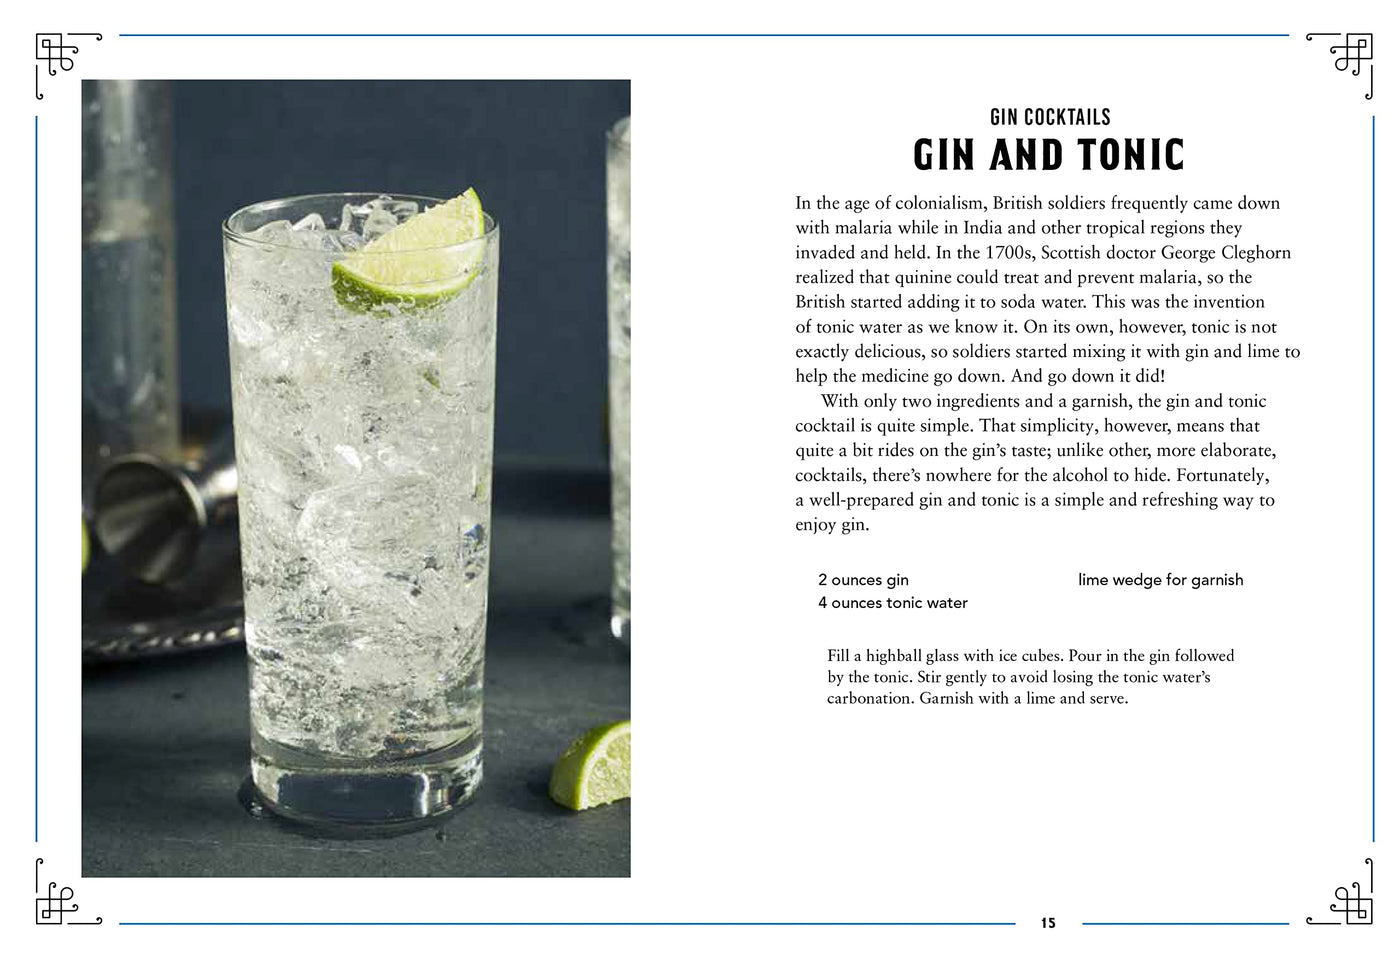 Enjoying Gin: A Tasting Guide And Journal